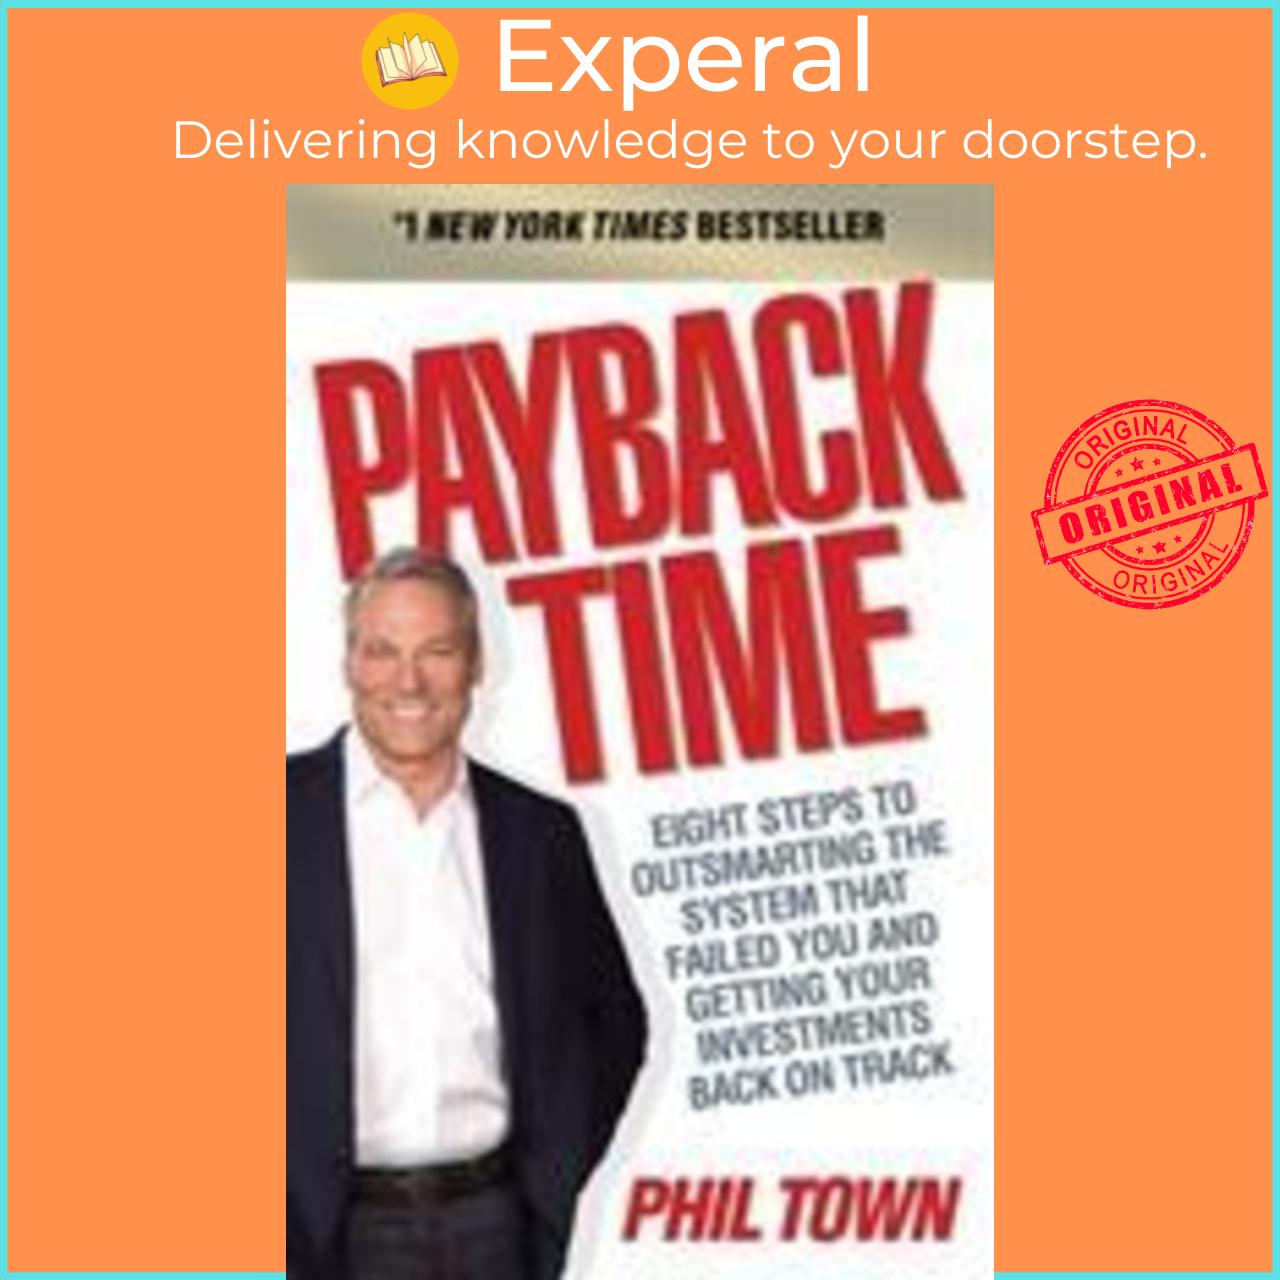 Sách - Payback Time : Eight Steps to Outsmarting the System That Failed You and Get by Phil Town (UK edition, paperback)